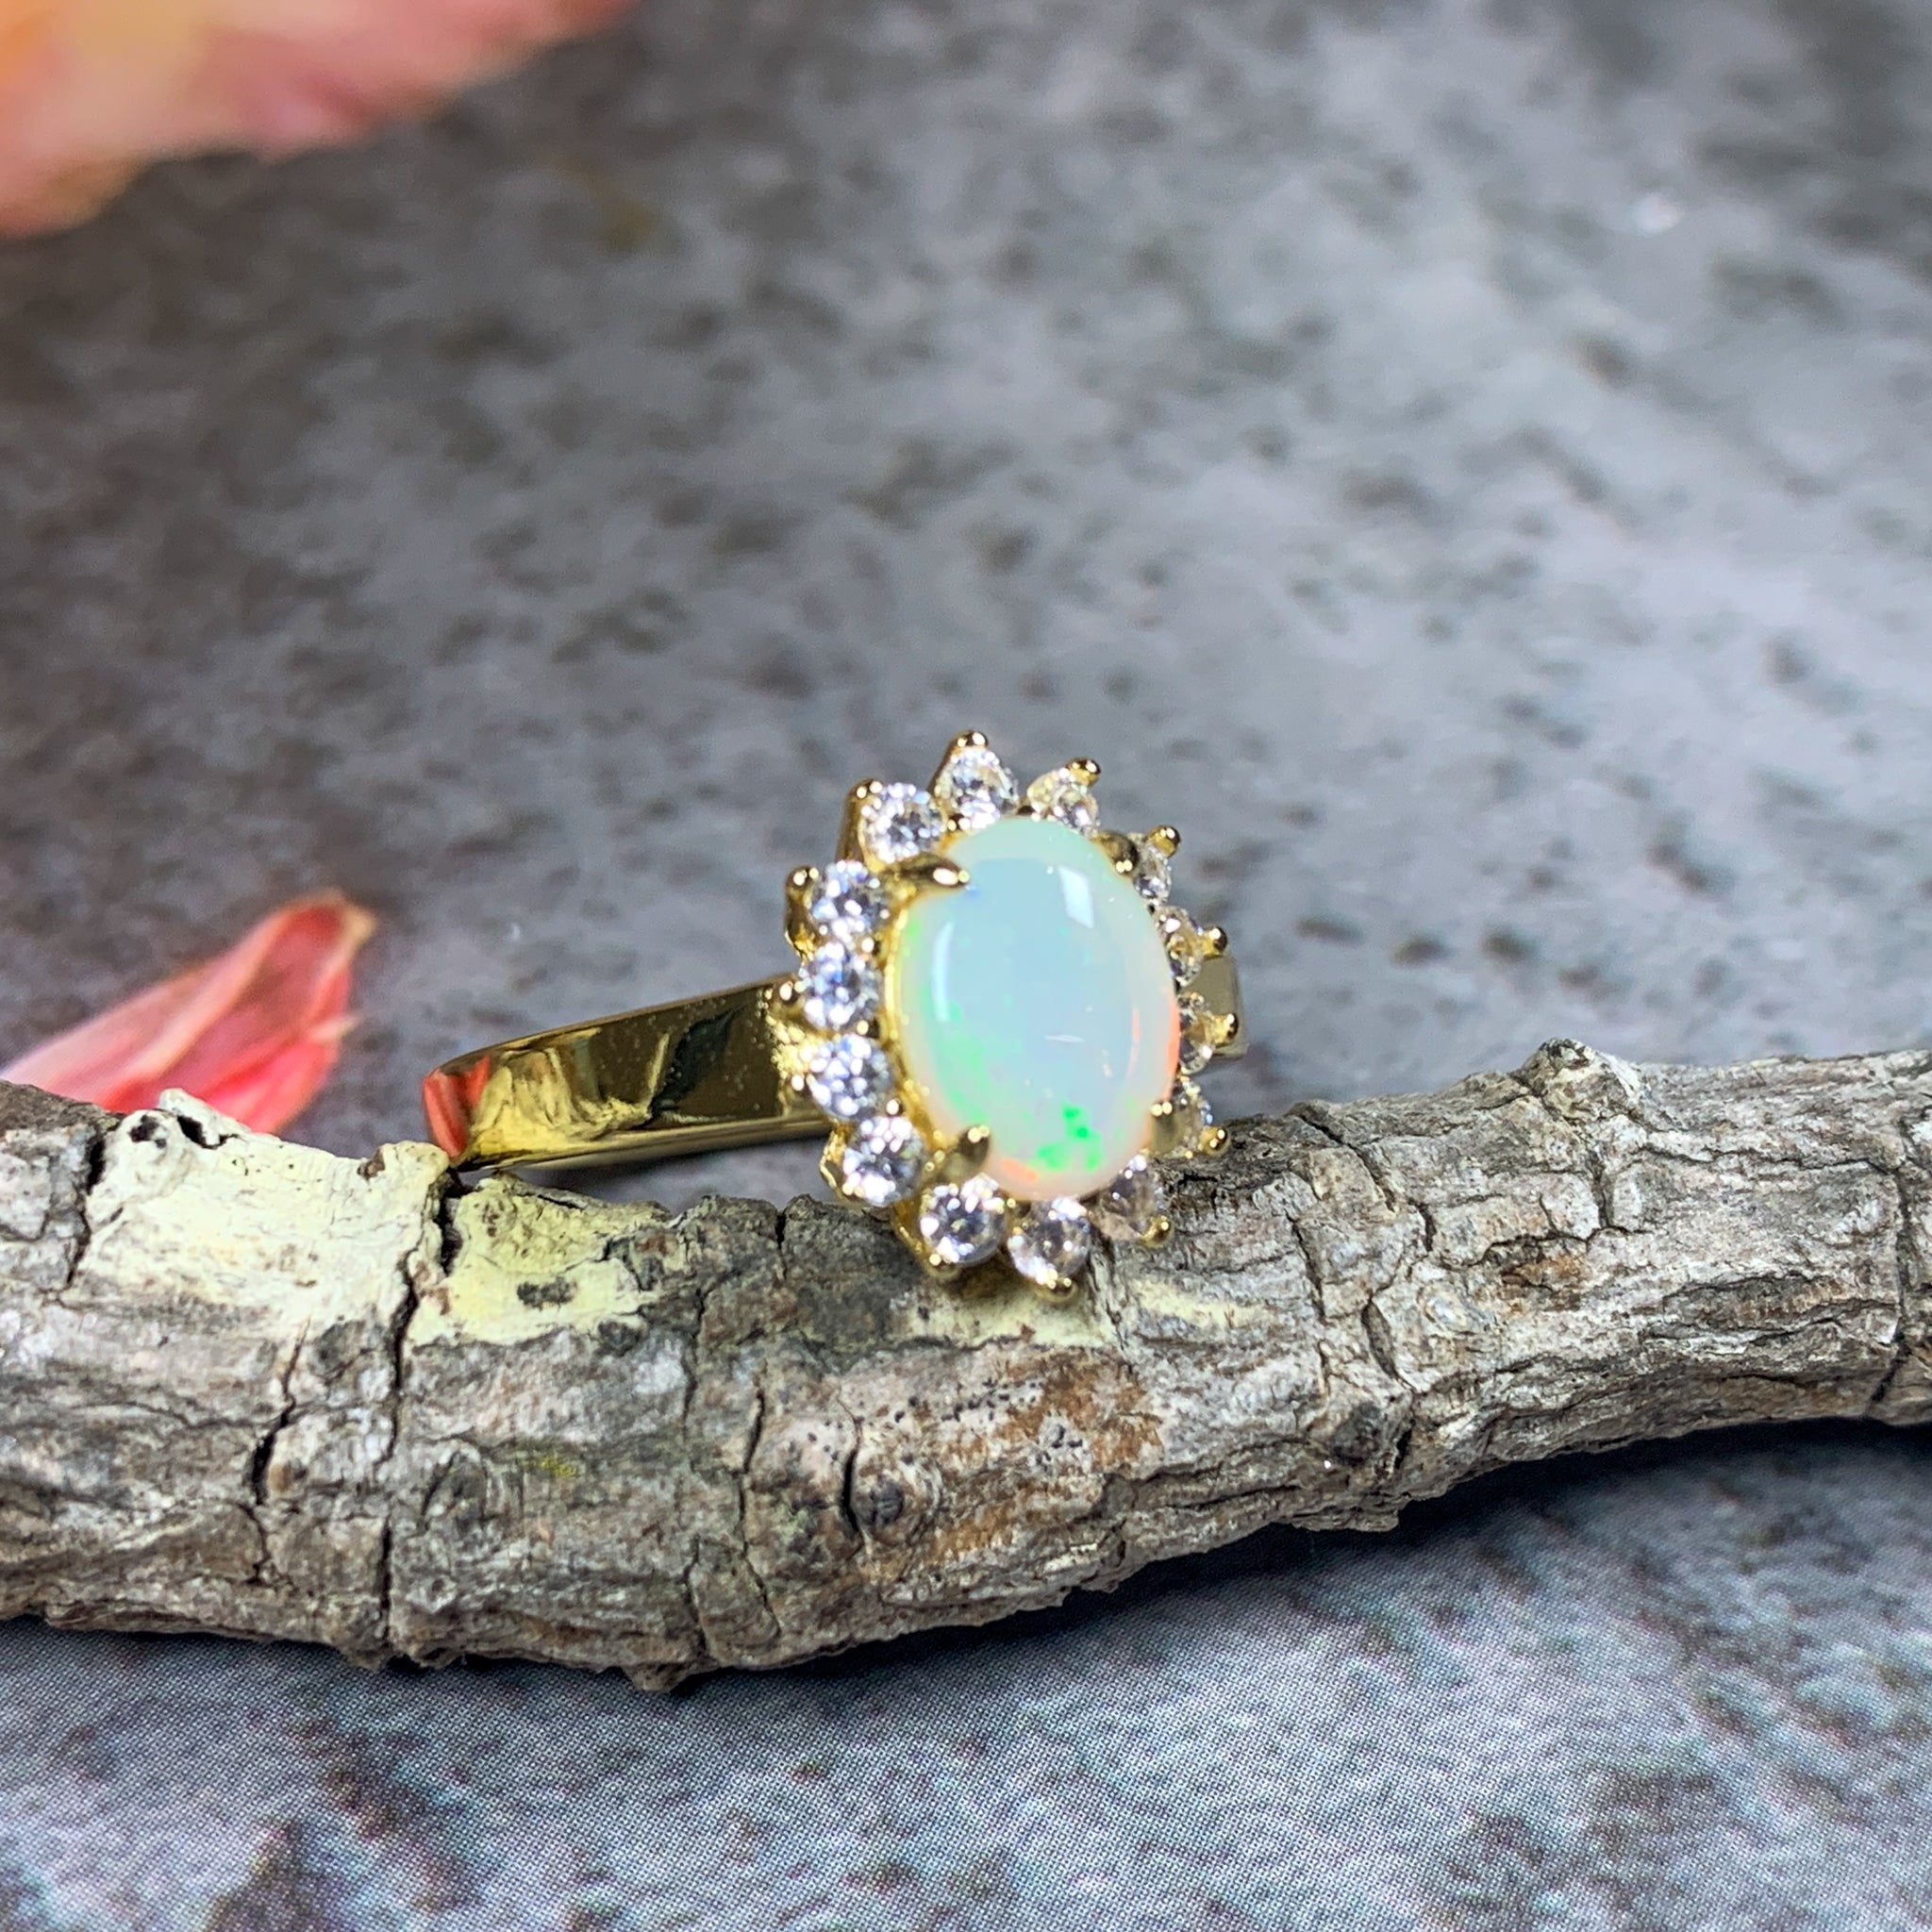 Yellow Gold plated Silver cluster ring 8x6mm White Opal - Masterpiece Jewellery Opal & Gems Sydney Australia | Online Shop